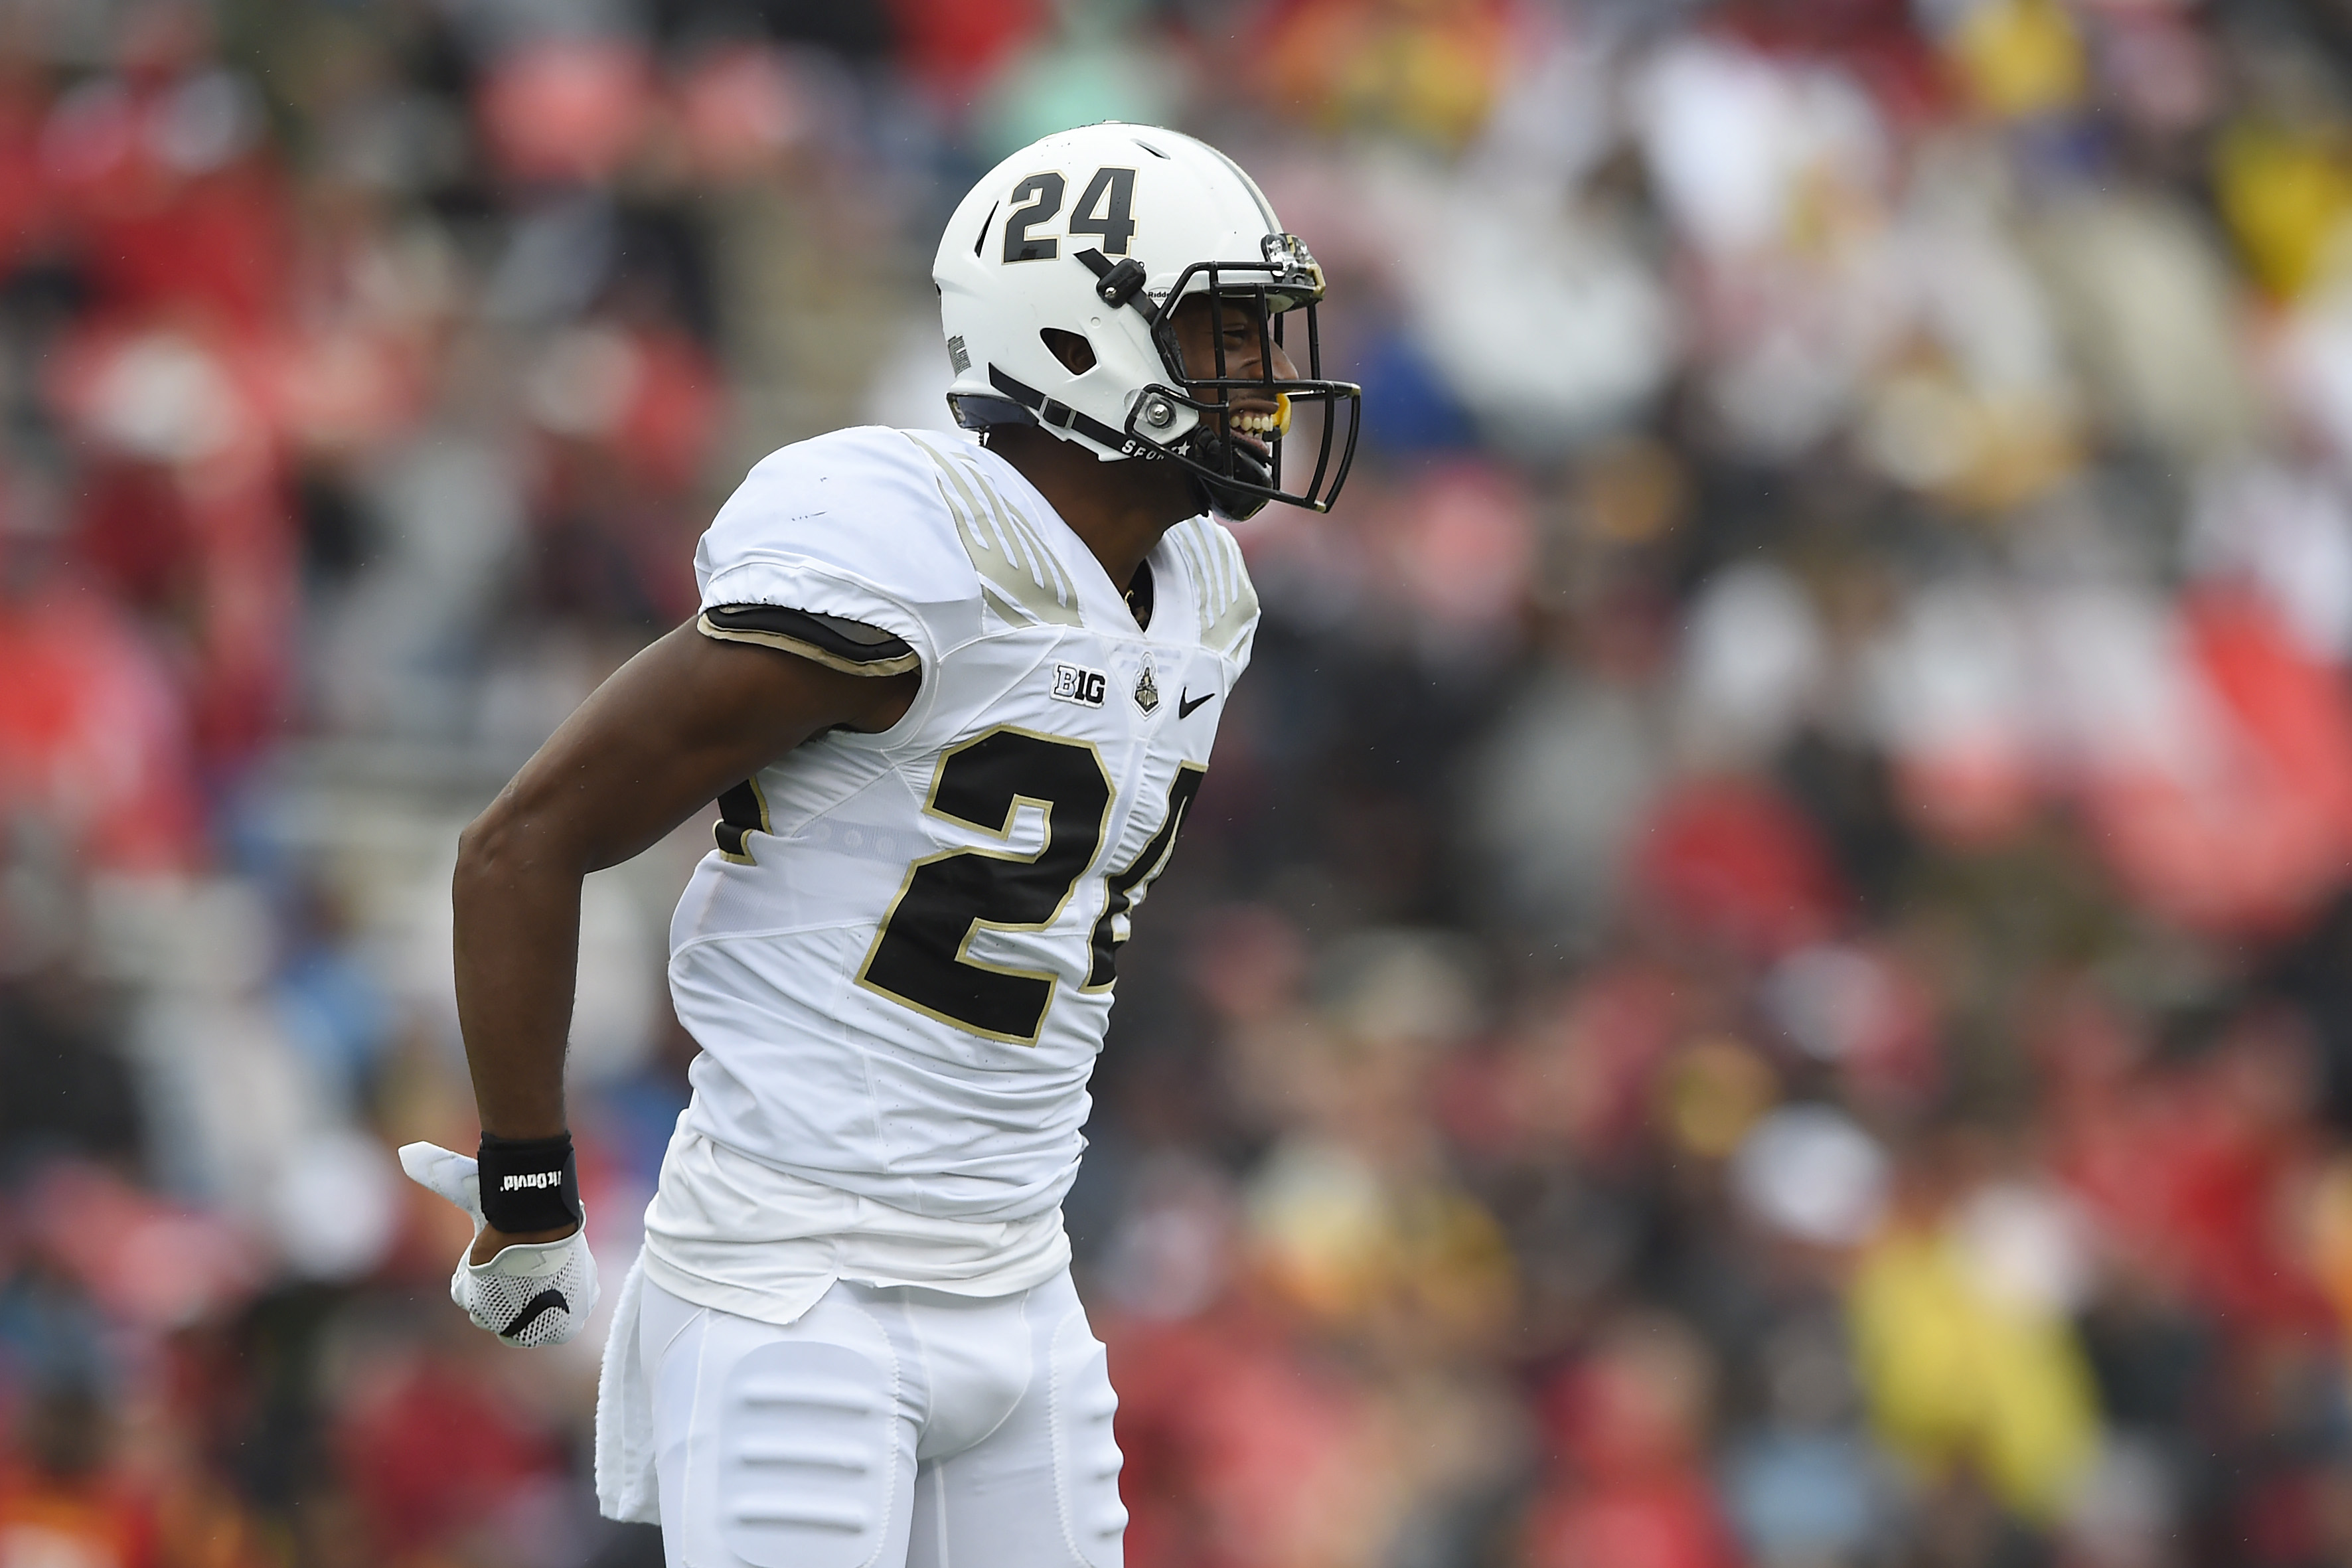 Oct 1, 2016; College Park, MD, USA; Purdue Boilermakers safety Tim Cason (24) reacts after an interception during the first quarter against the Maryland Terrapins at Byrd Stadium. Mandatory Credit: Tommy Gilligan-USA TODAY Sports